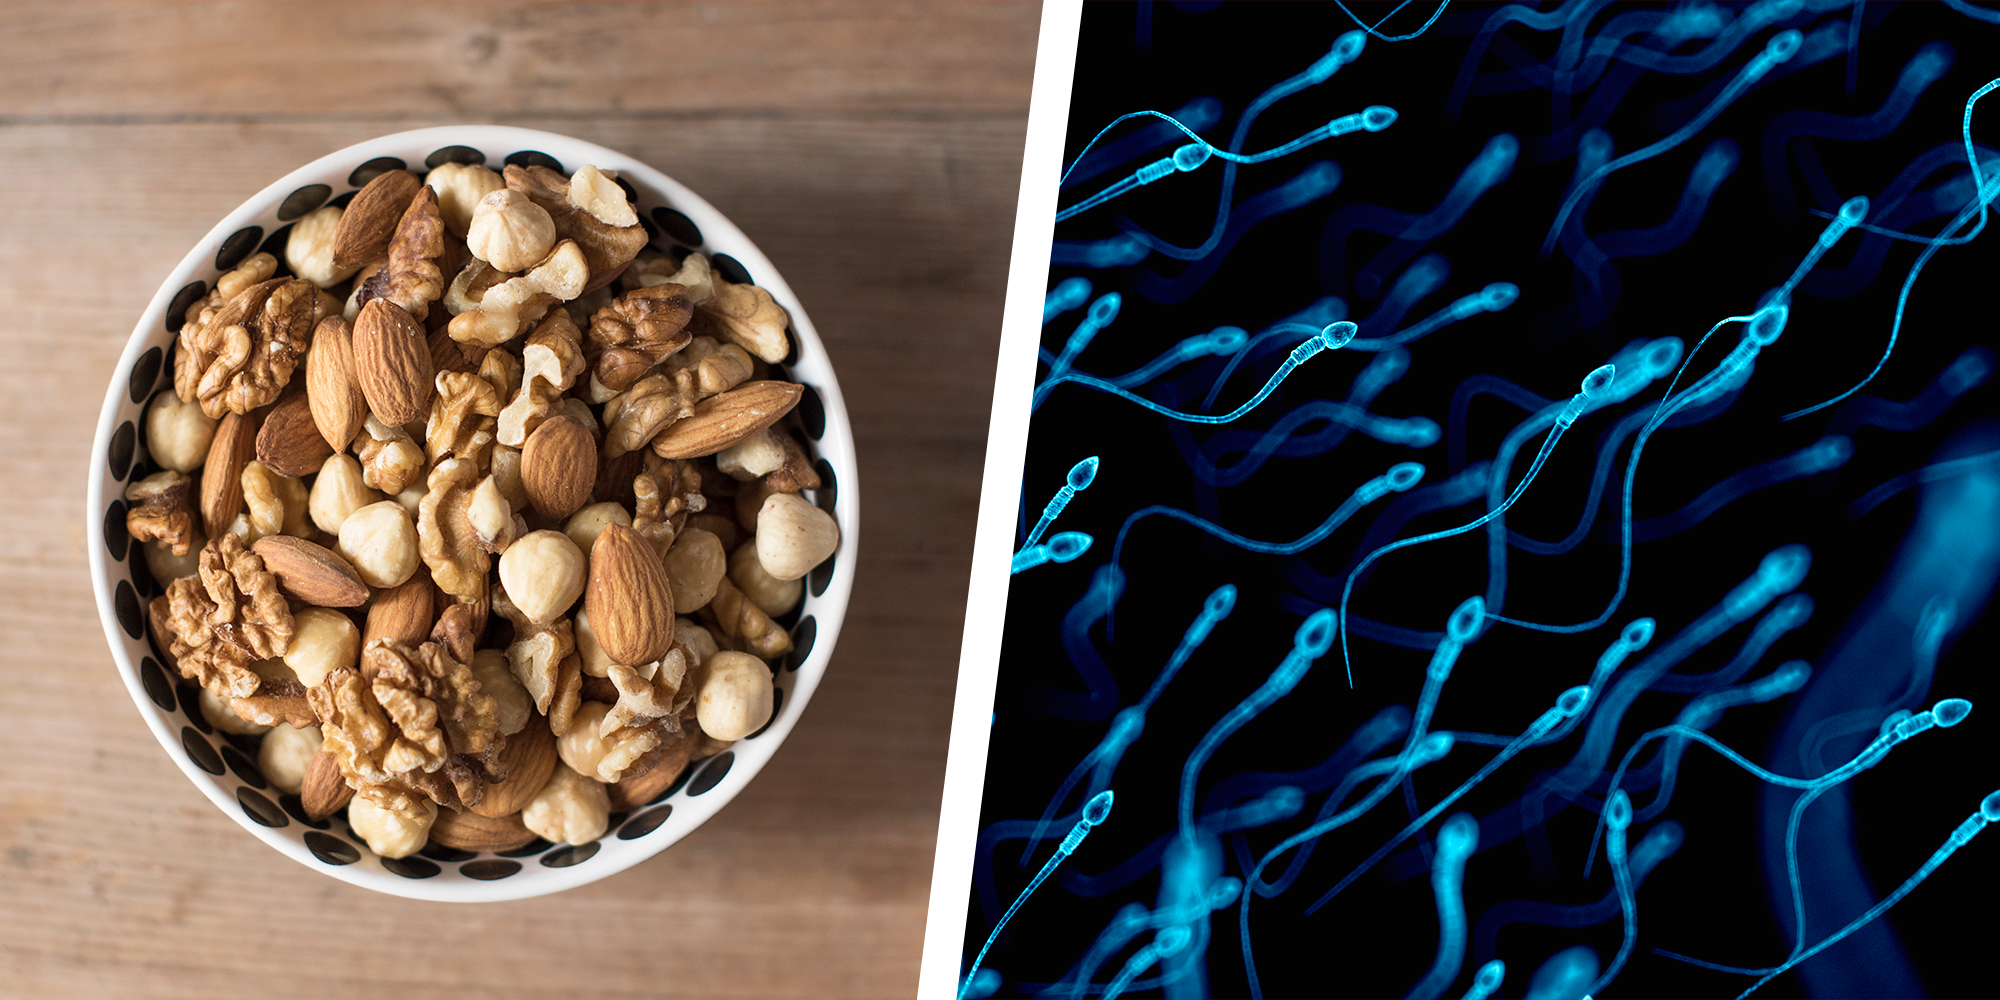 Eating Nuts Could Make Sperm Healthier